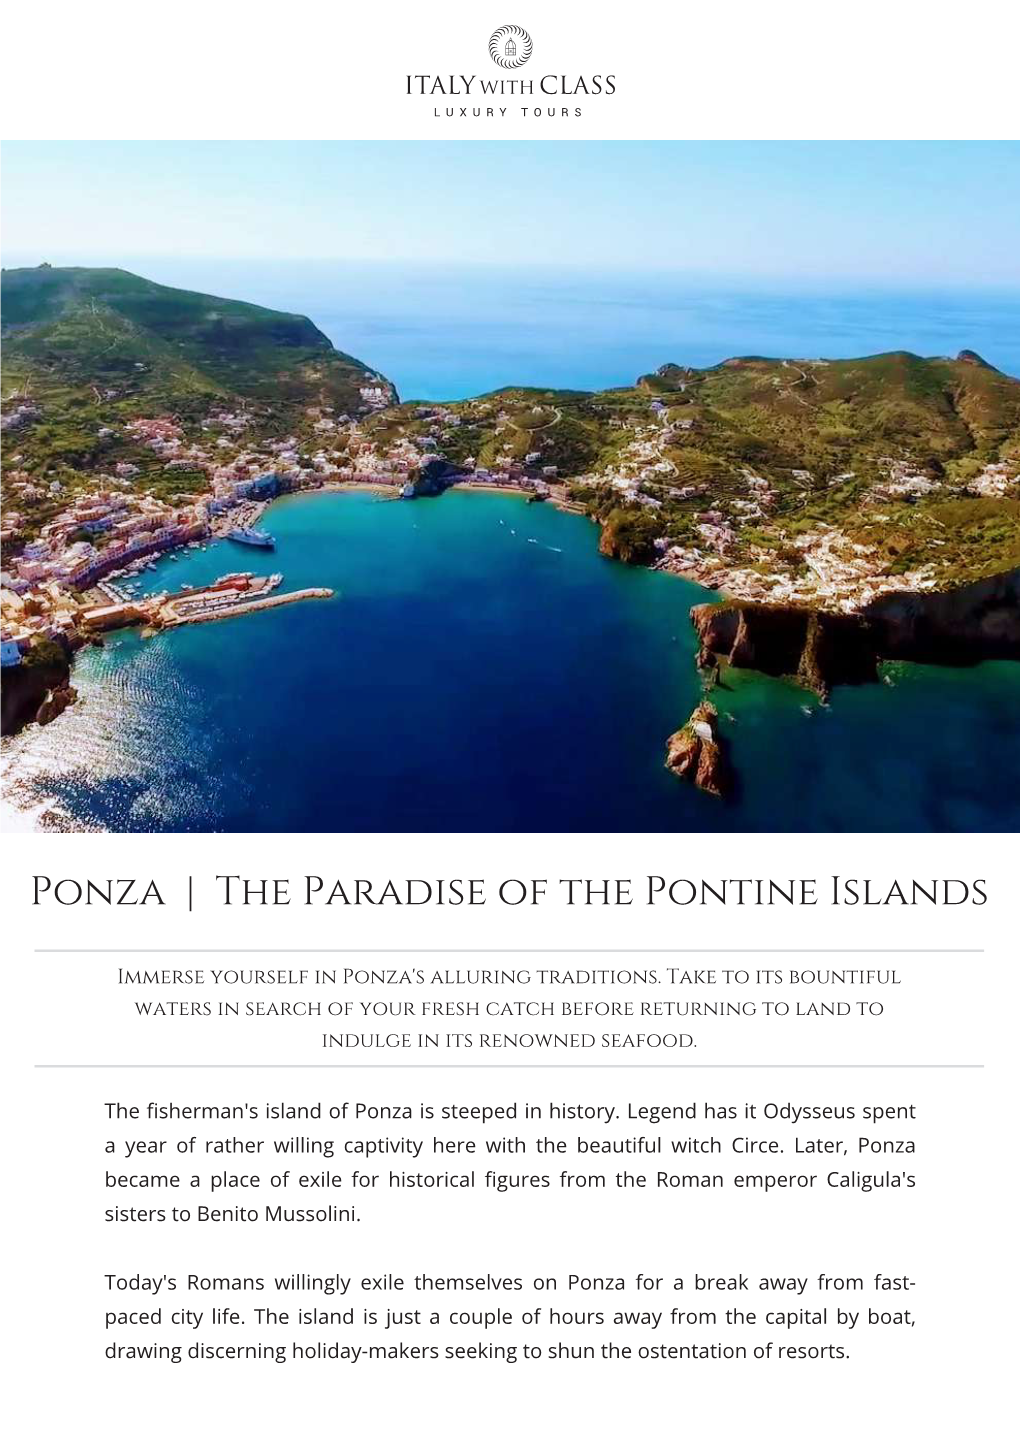 Ponza | the Paradise of the Pontine Islands